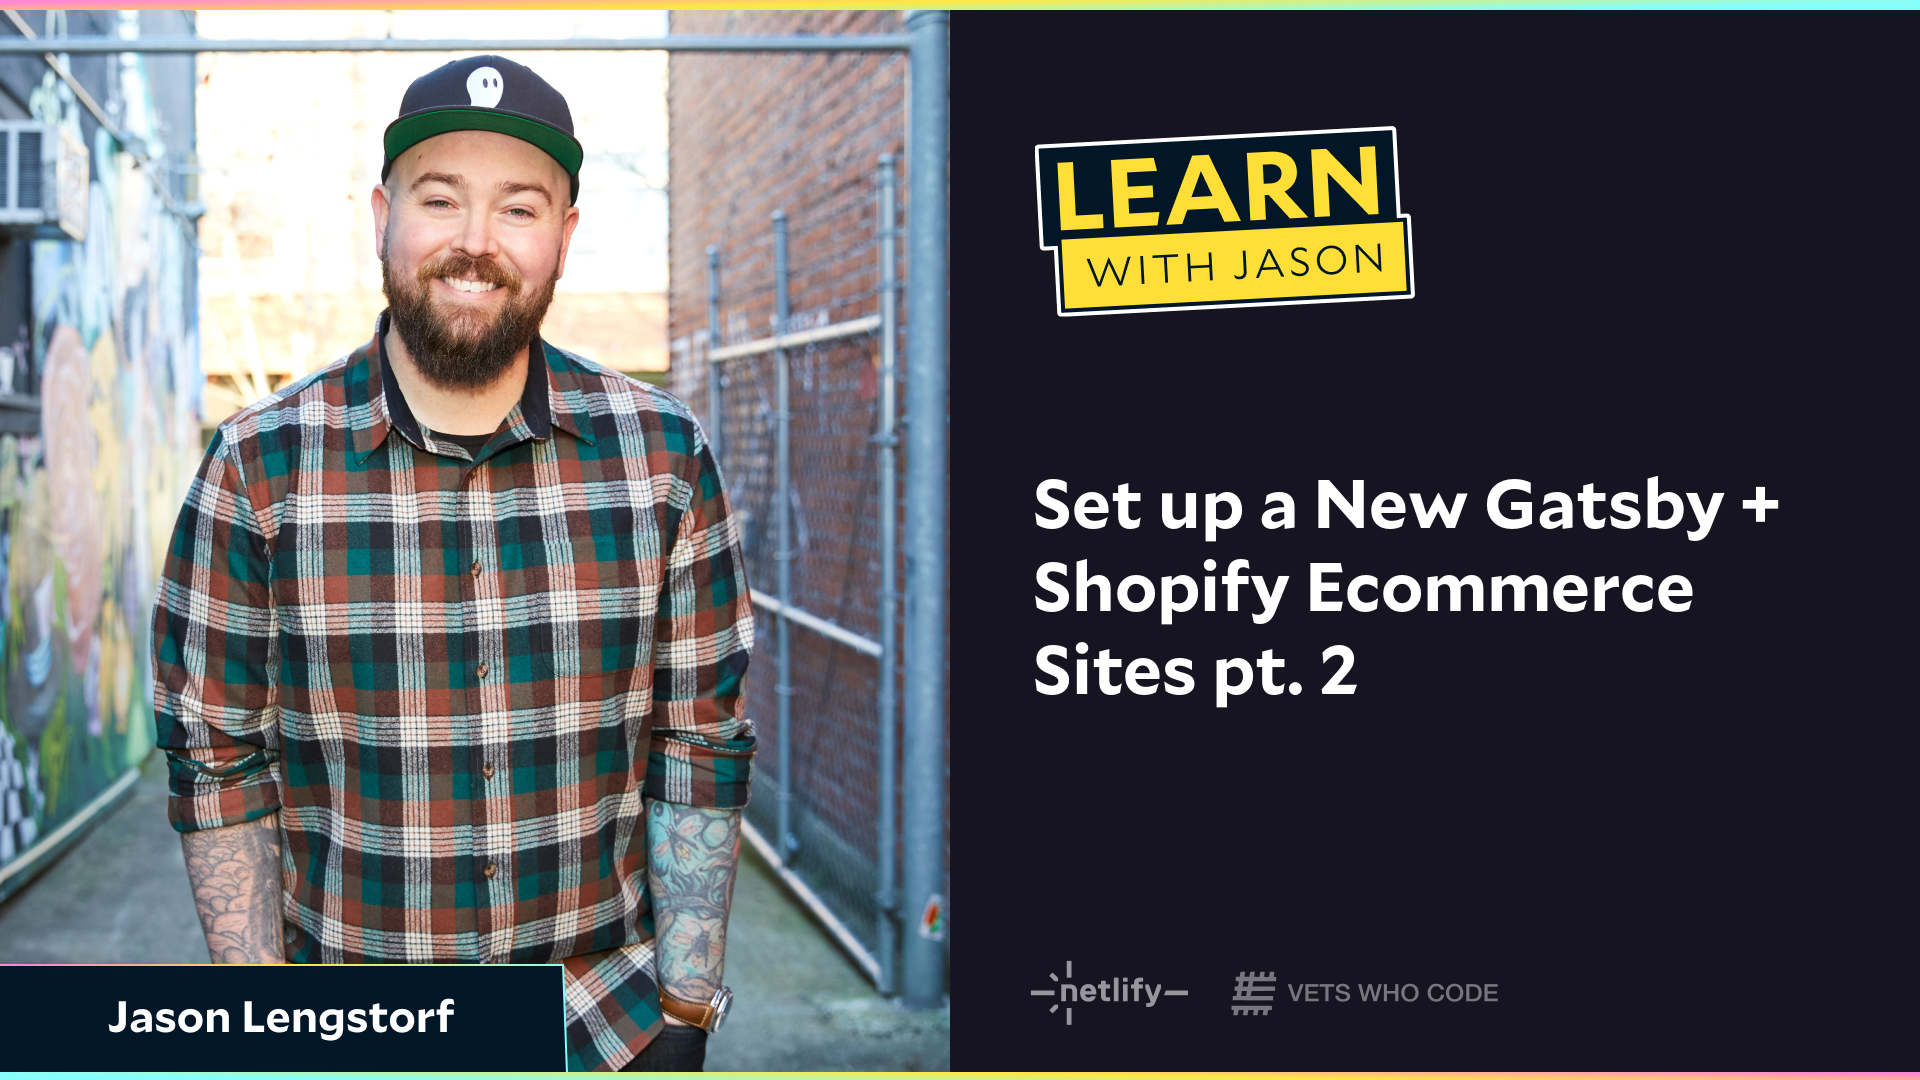 Set up a New Gatsby + Shopify Ecommerce Sites pt. 2 (with Jason Lengstorf)